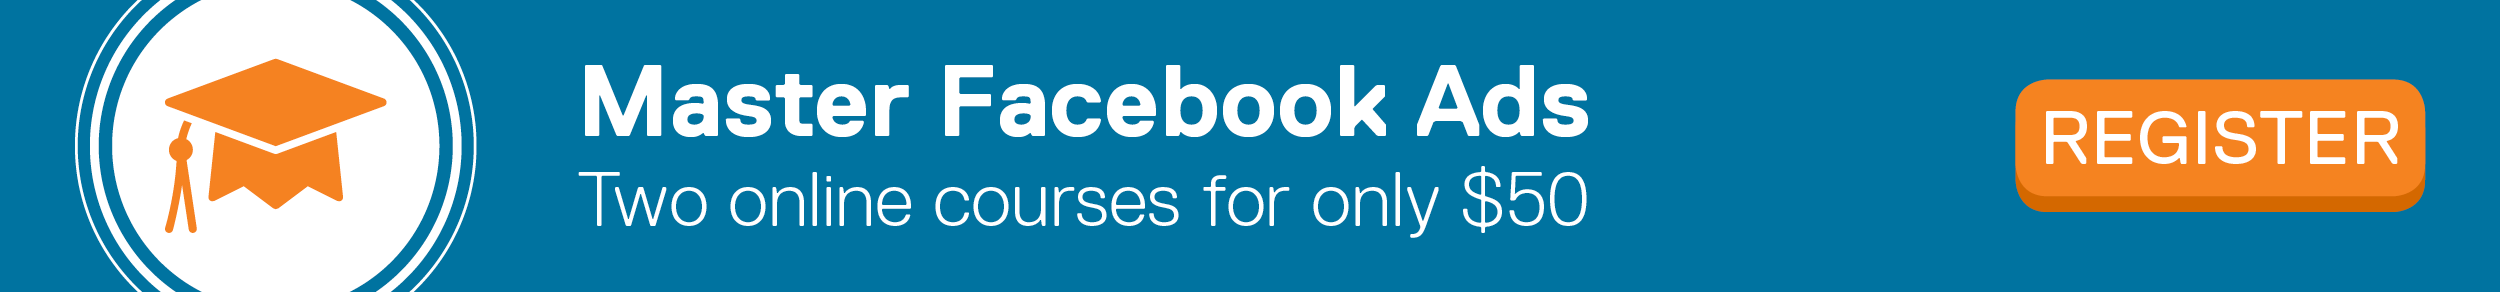 Master Facebook Ads: Two online courses for only $50. REGISTER.